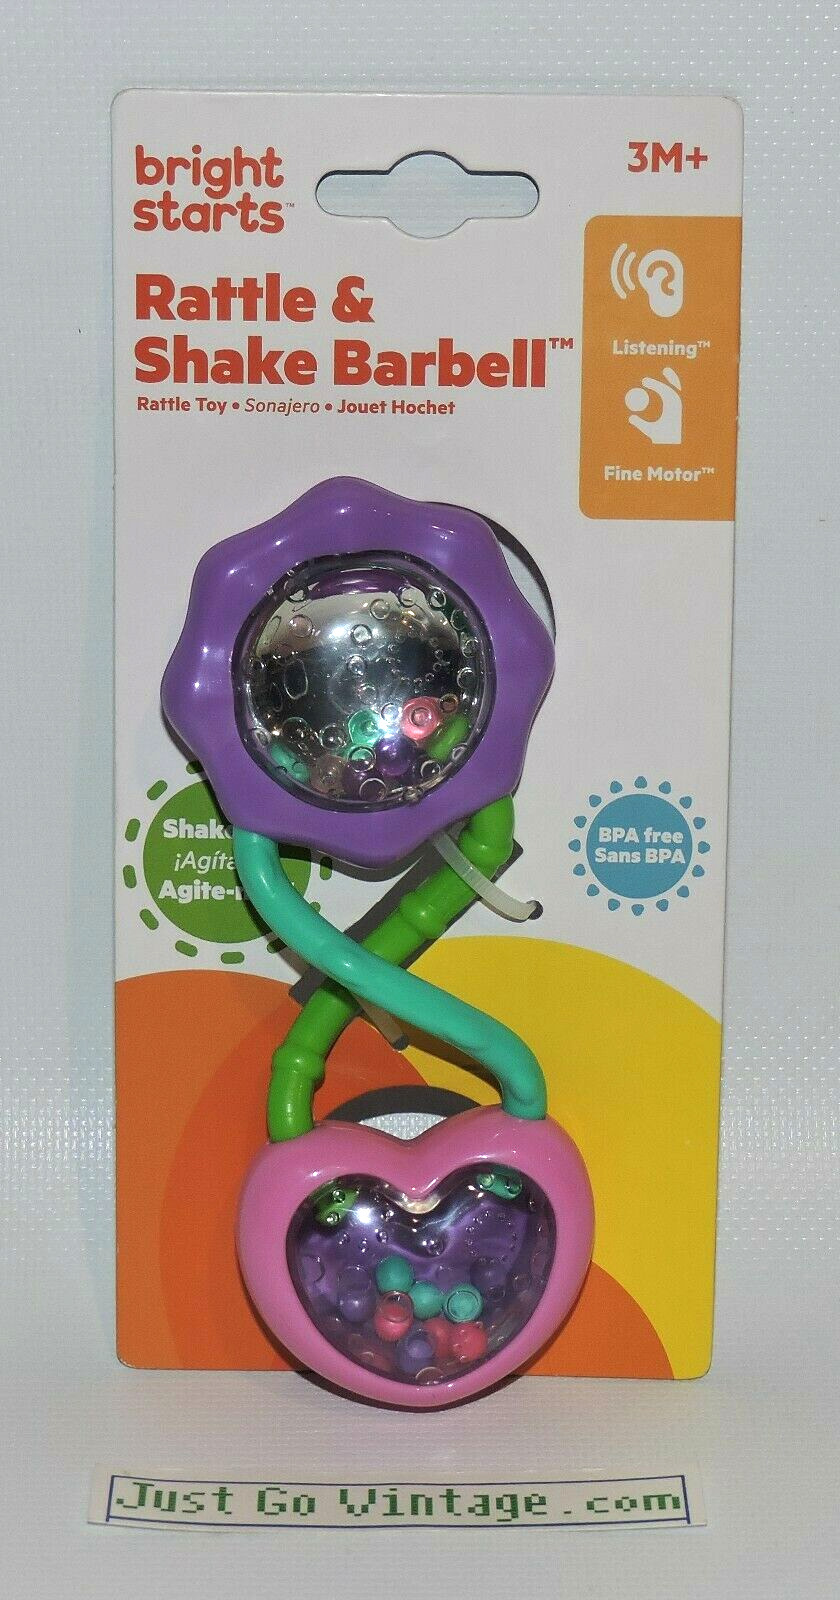 Bright Starts Rattle And Shake Barbell Toy Pretty In Pink & Purple 3m+, New, Nip